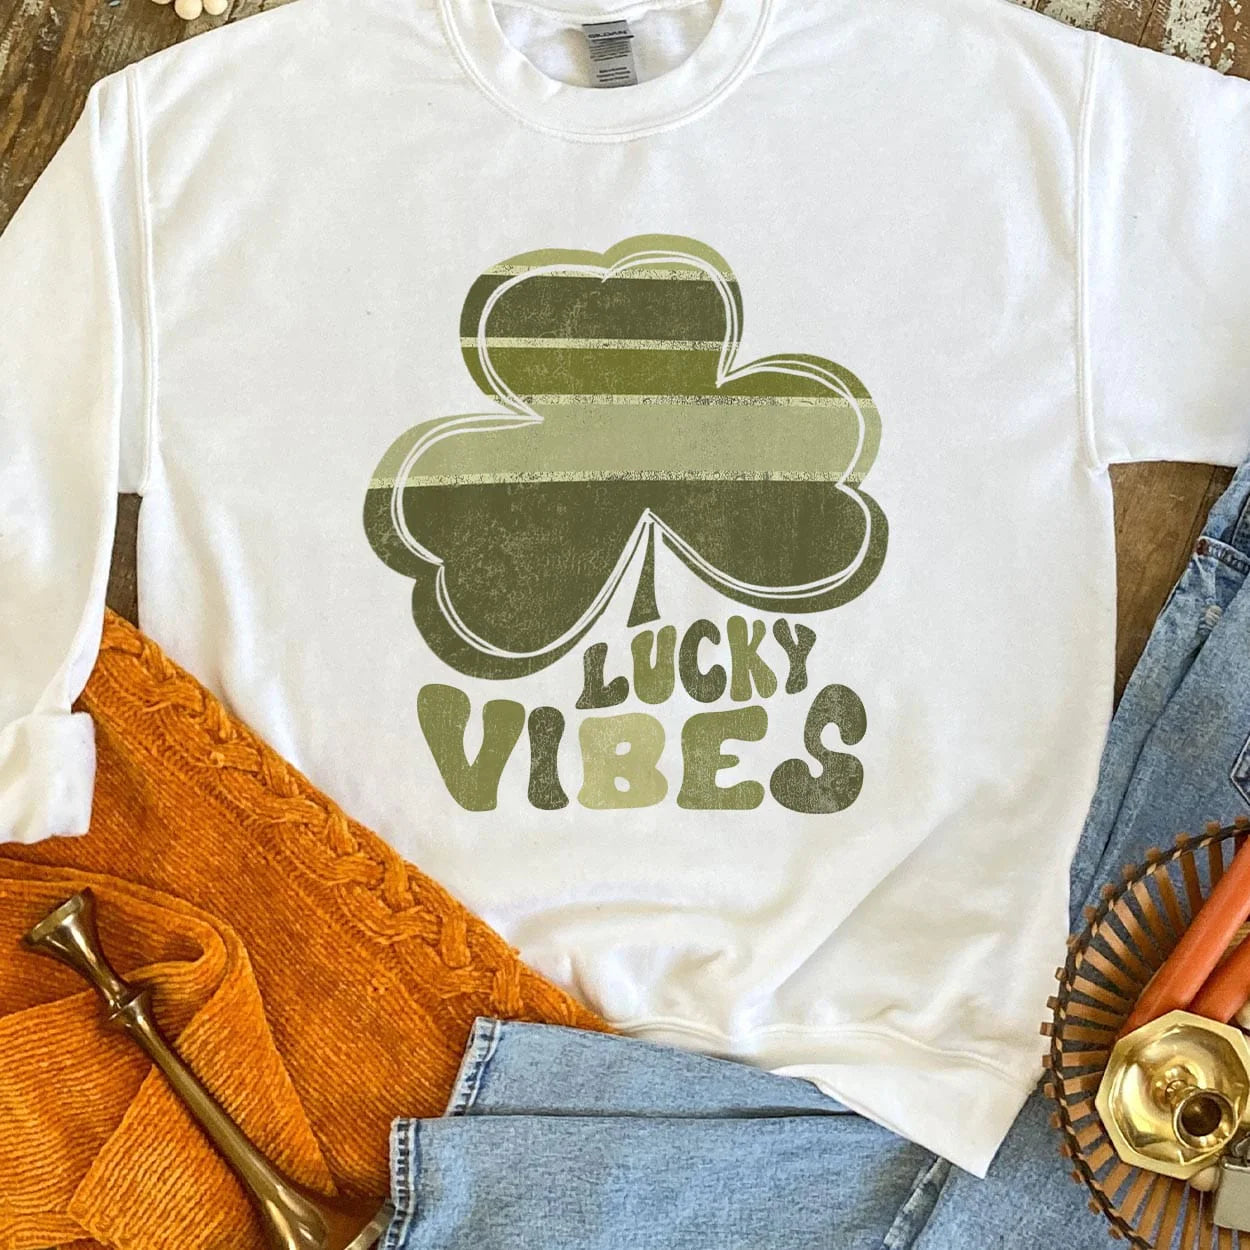 A white crew neck sweatshirt featuring a large graphic of a clover with various shades of green and the words "lucky vibes" below it with each letter coordinating to a color in the clover. Item is pictured on a brown background.